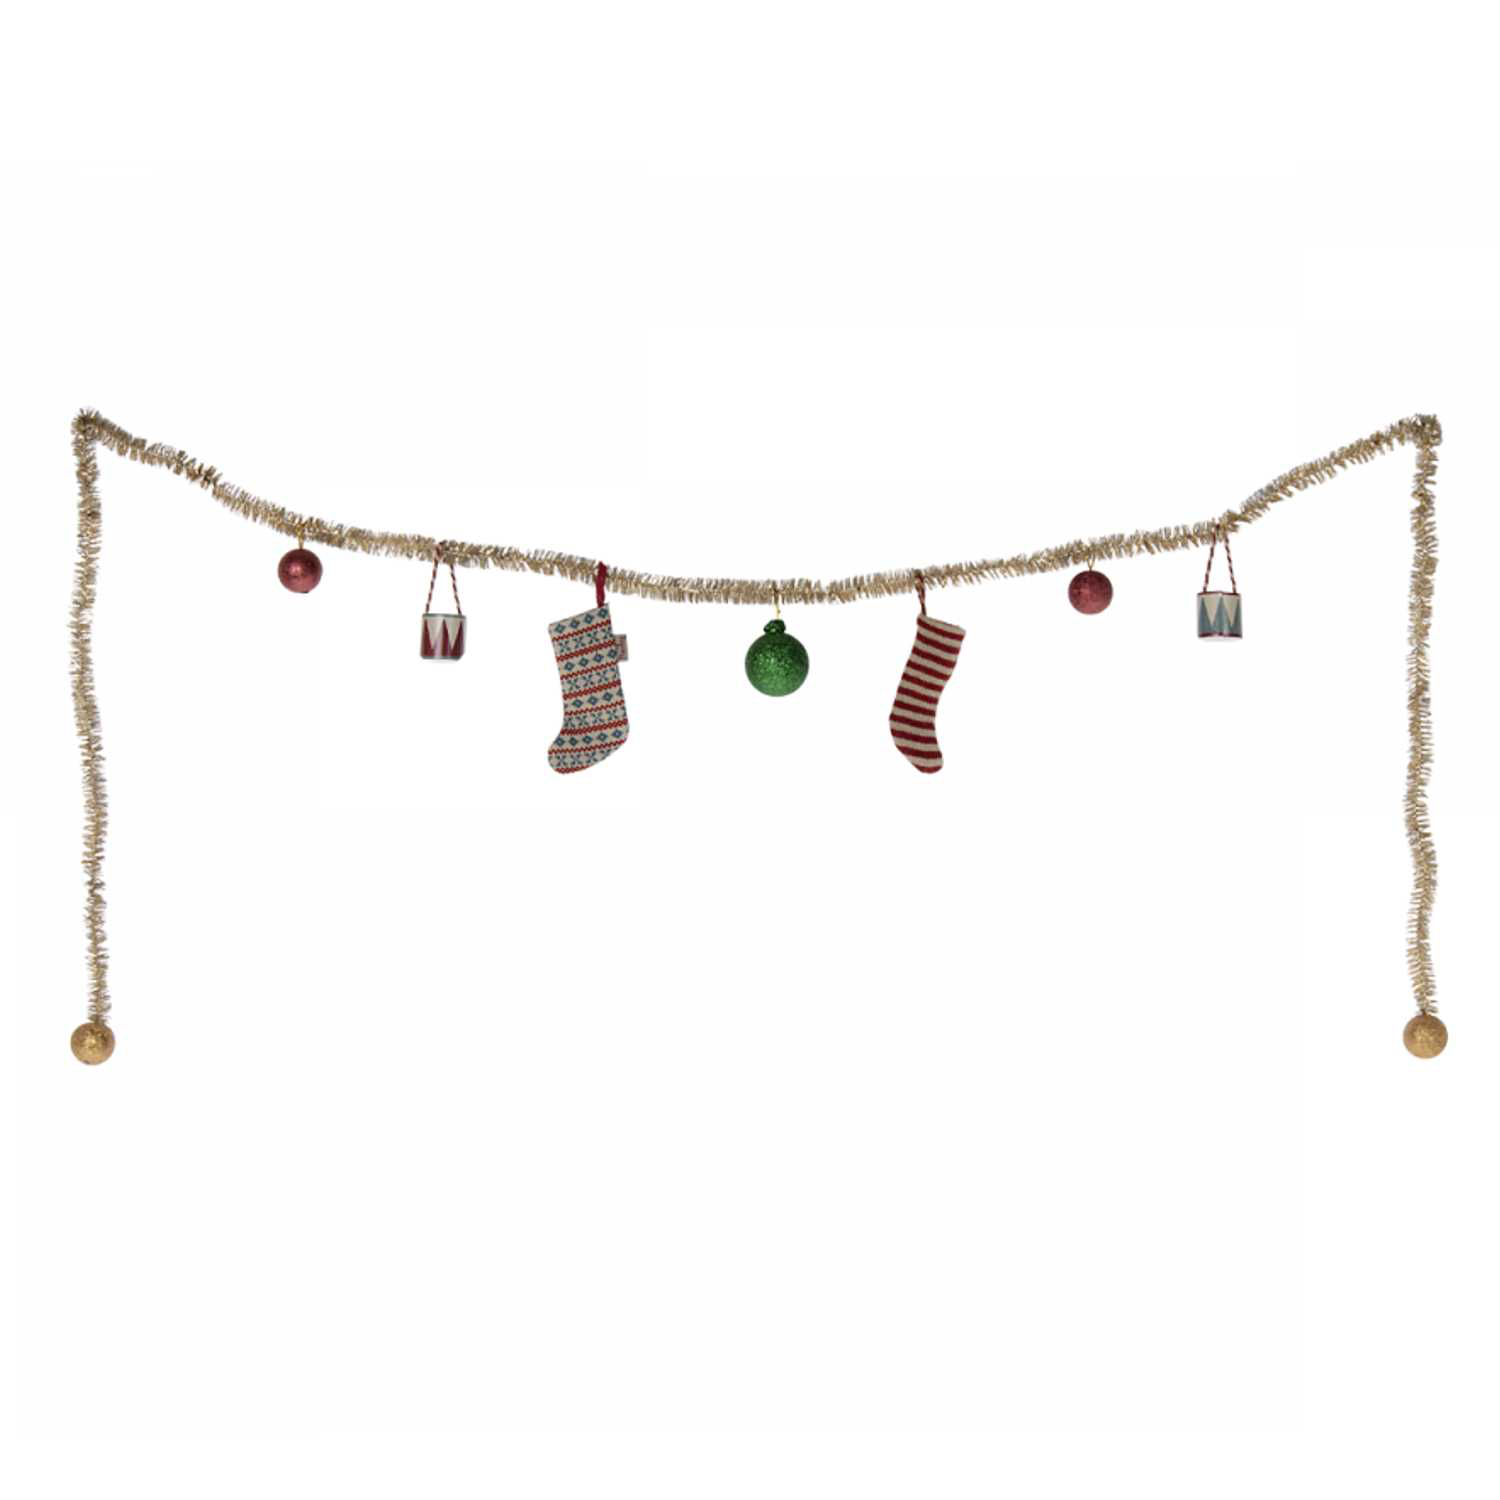 Christmas garland (available in 2 sizes)